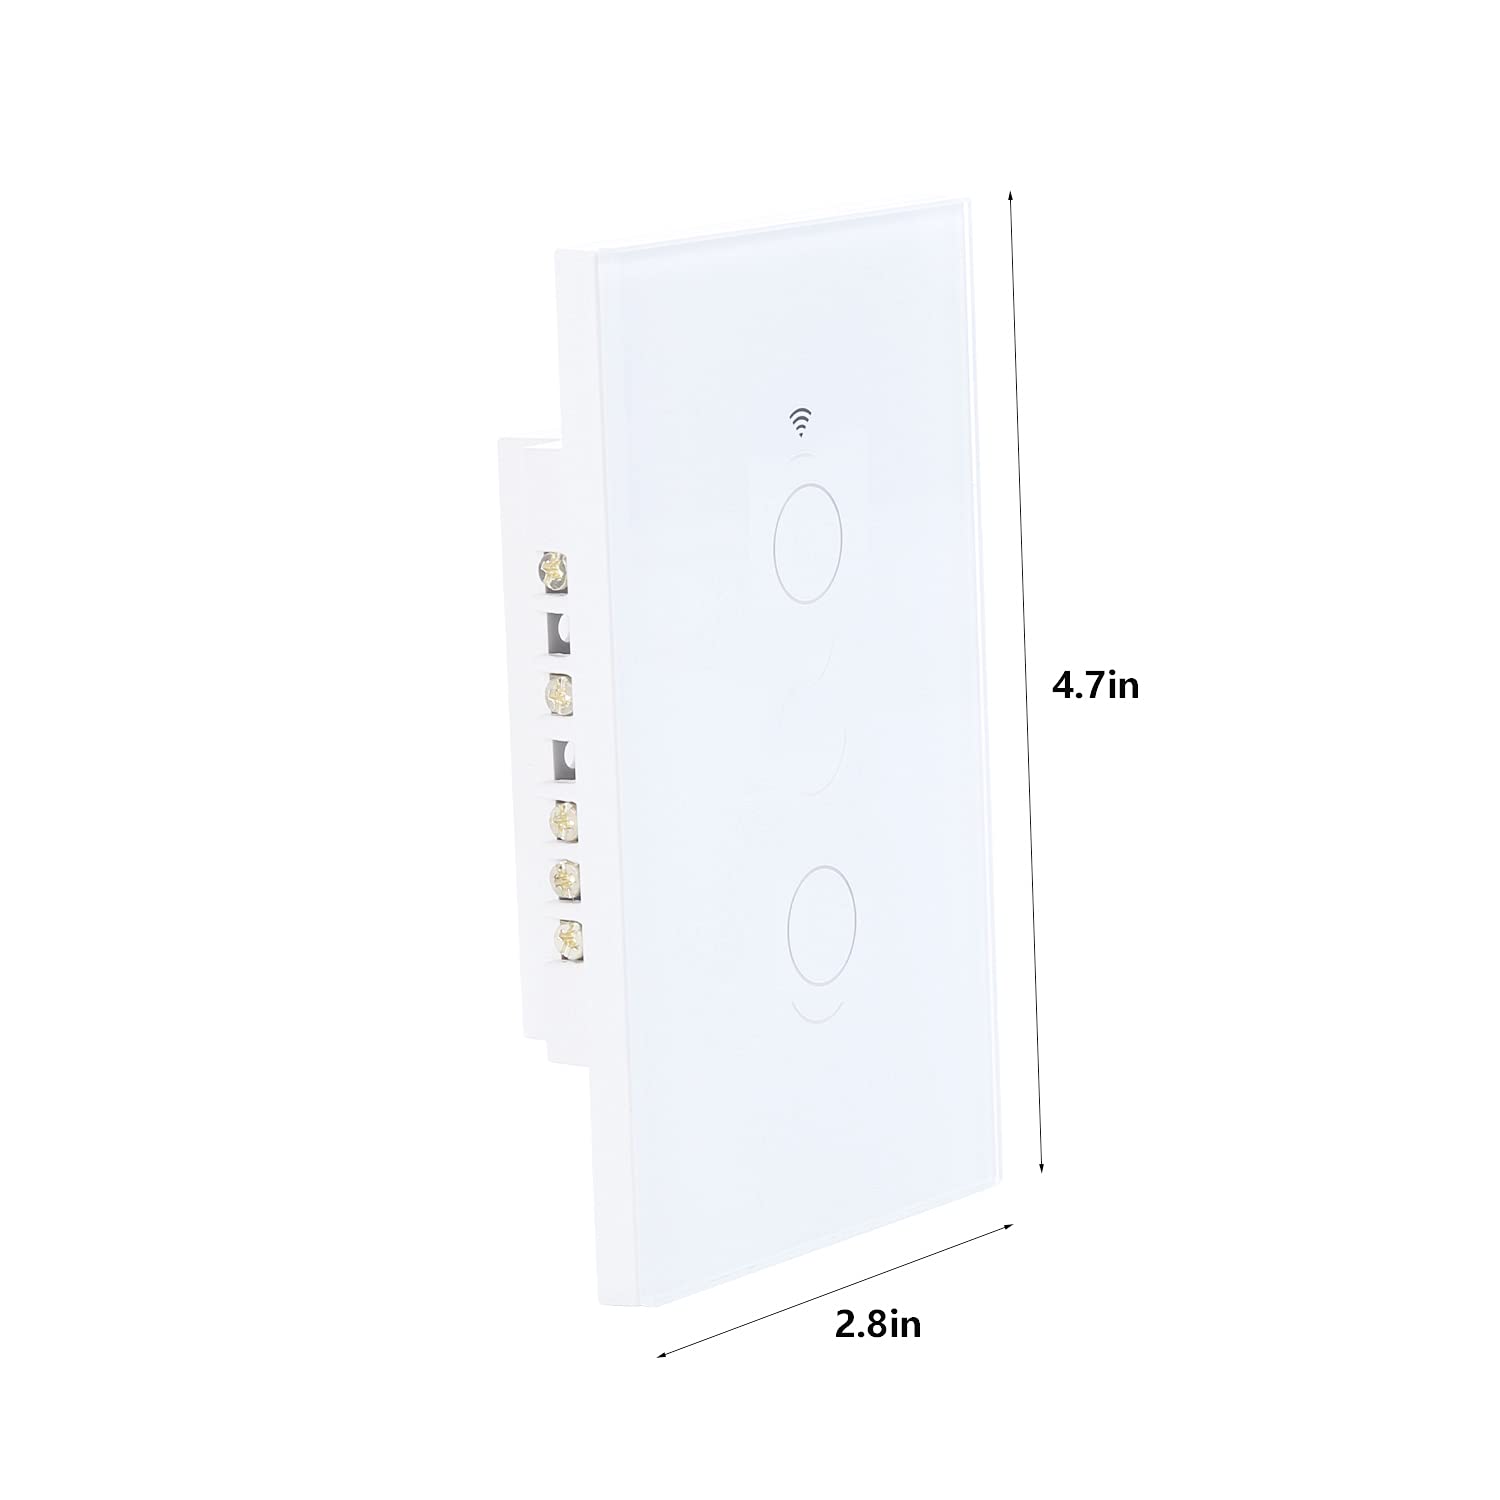 KKC Tempered Glass WiFi Light Switch, 2 Gang Smart Light Switch No Neutral Wire Required, Touch Wall Smart Switch, for US Standard Compatible with Alexa Smart Life Tuya App (Two Way, White)